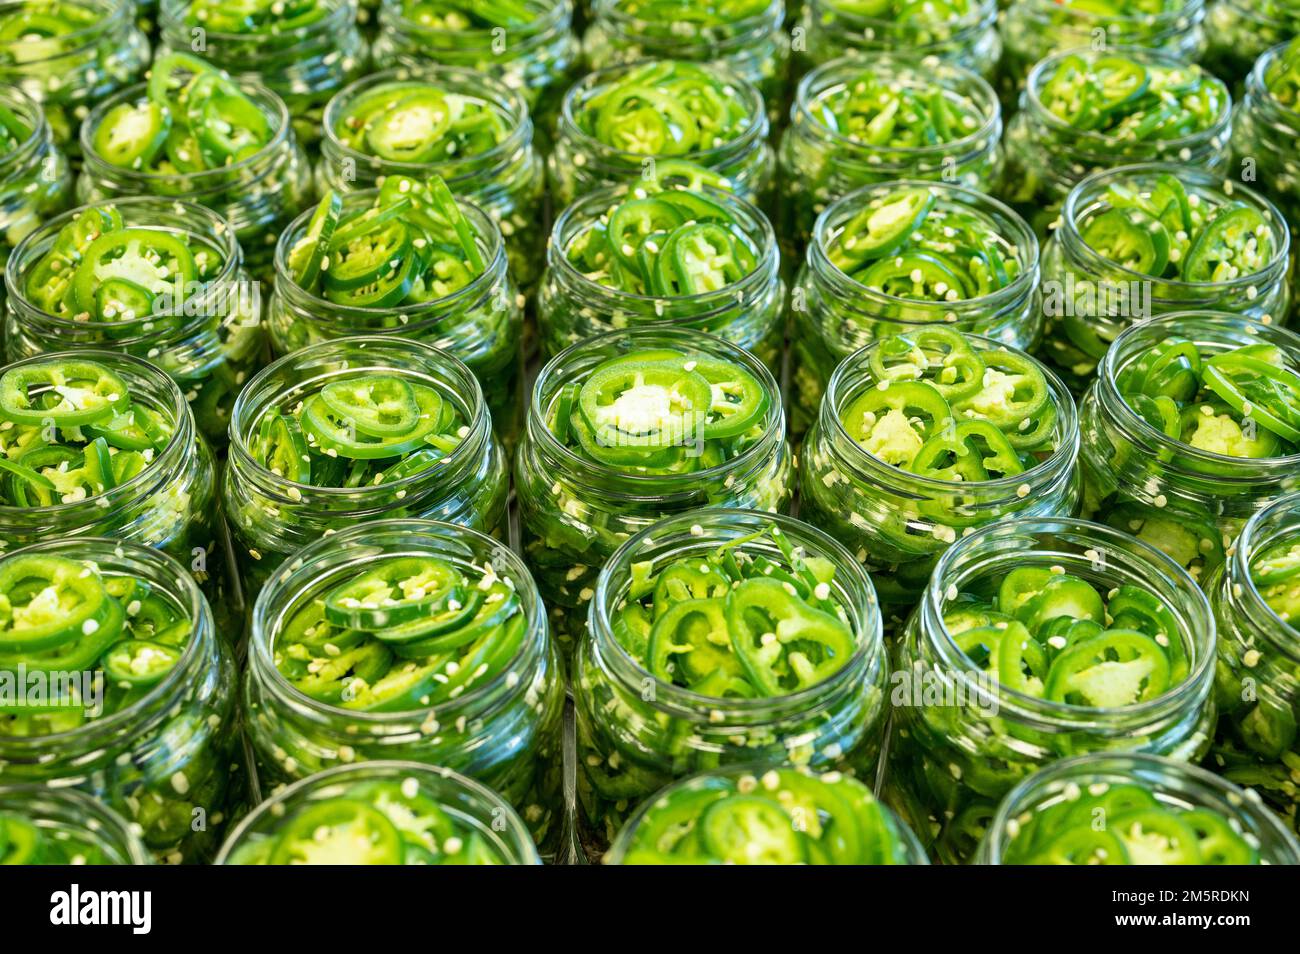 Fresh jalapeno peppers in jars close up. Preparation for conservation. Homemade canned vegetables. Healthy fermented food. Top view. Stock Photo